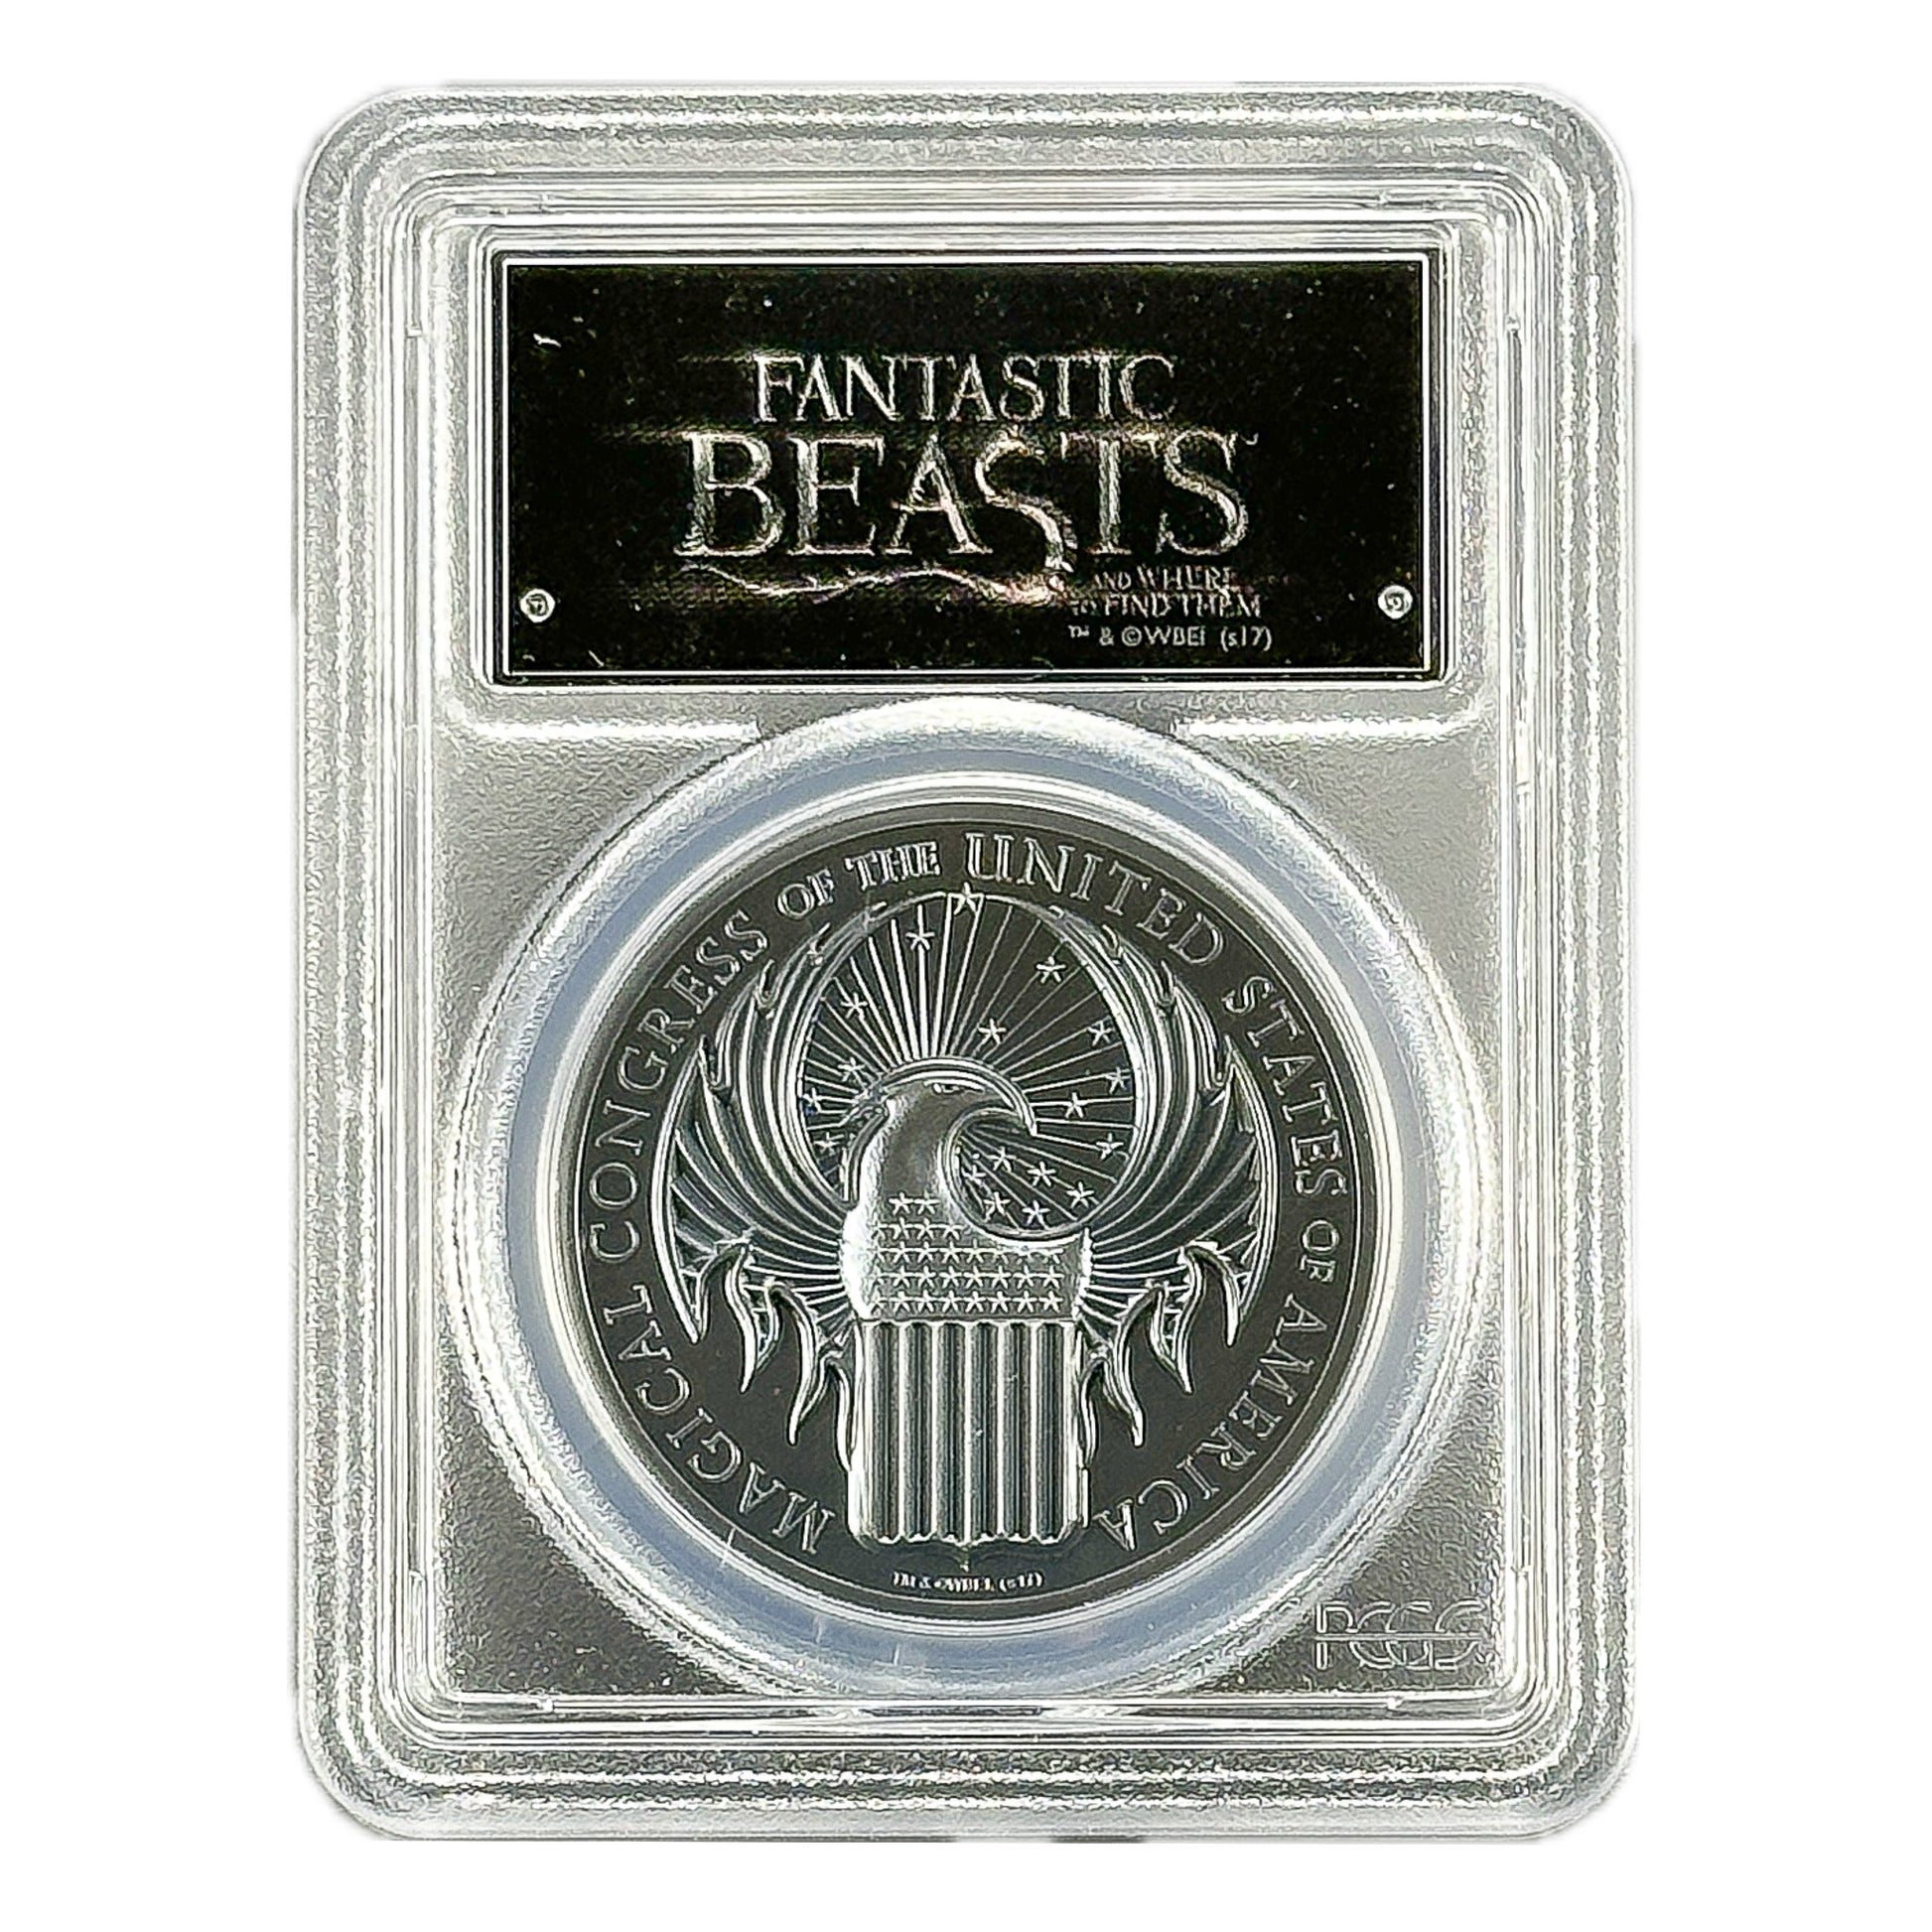 2017 Magical Congress of the USA - Fantastic Beasts and Where to Find Them 1 oz Silver Coin PF70 - OZB